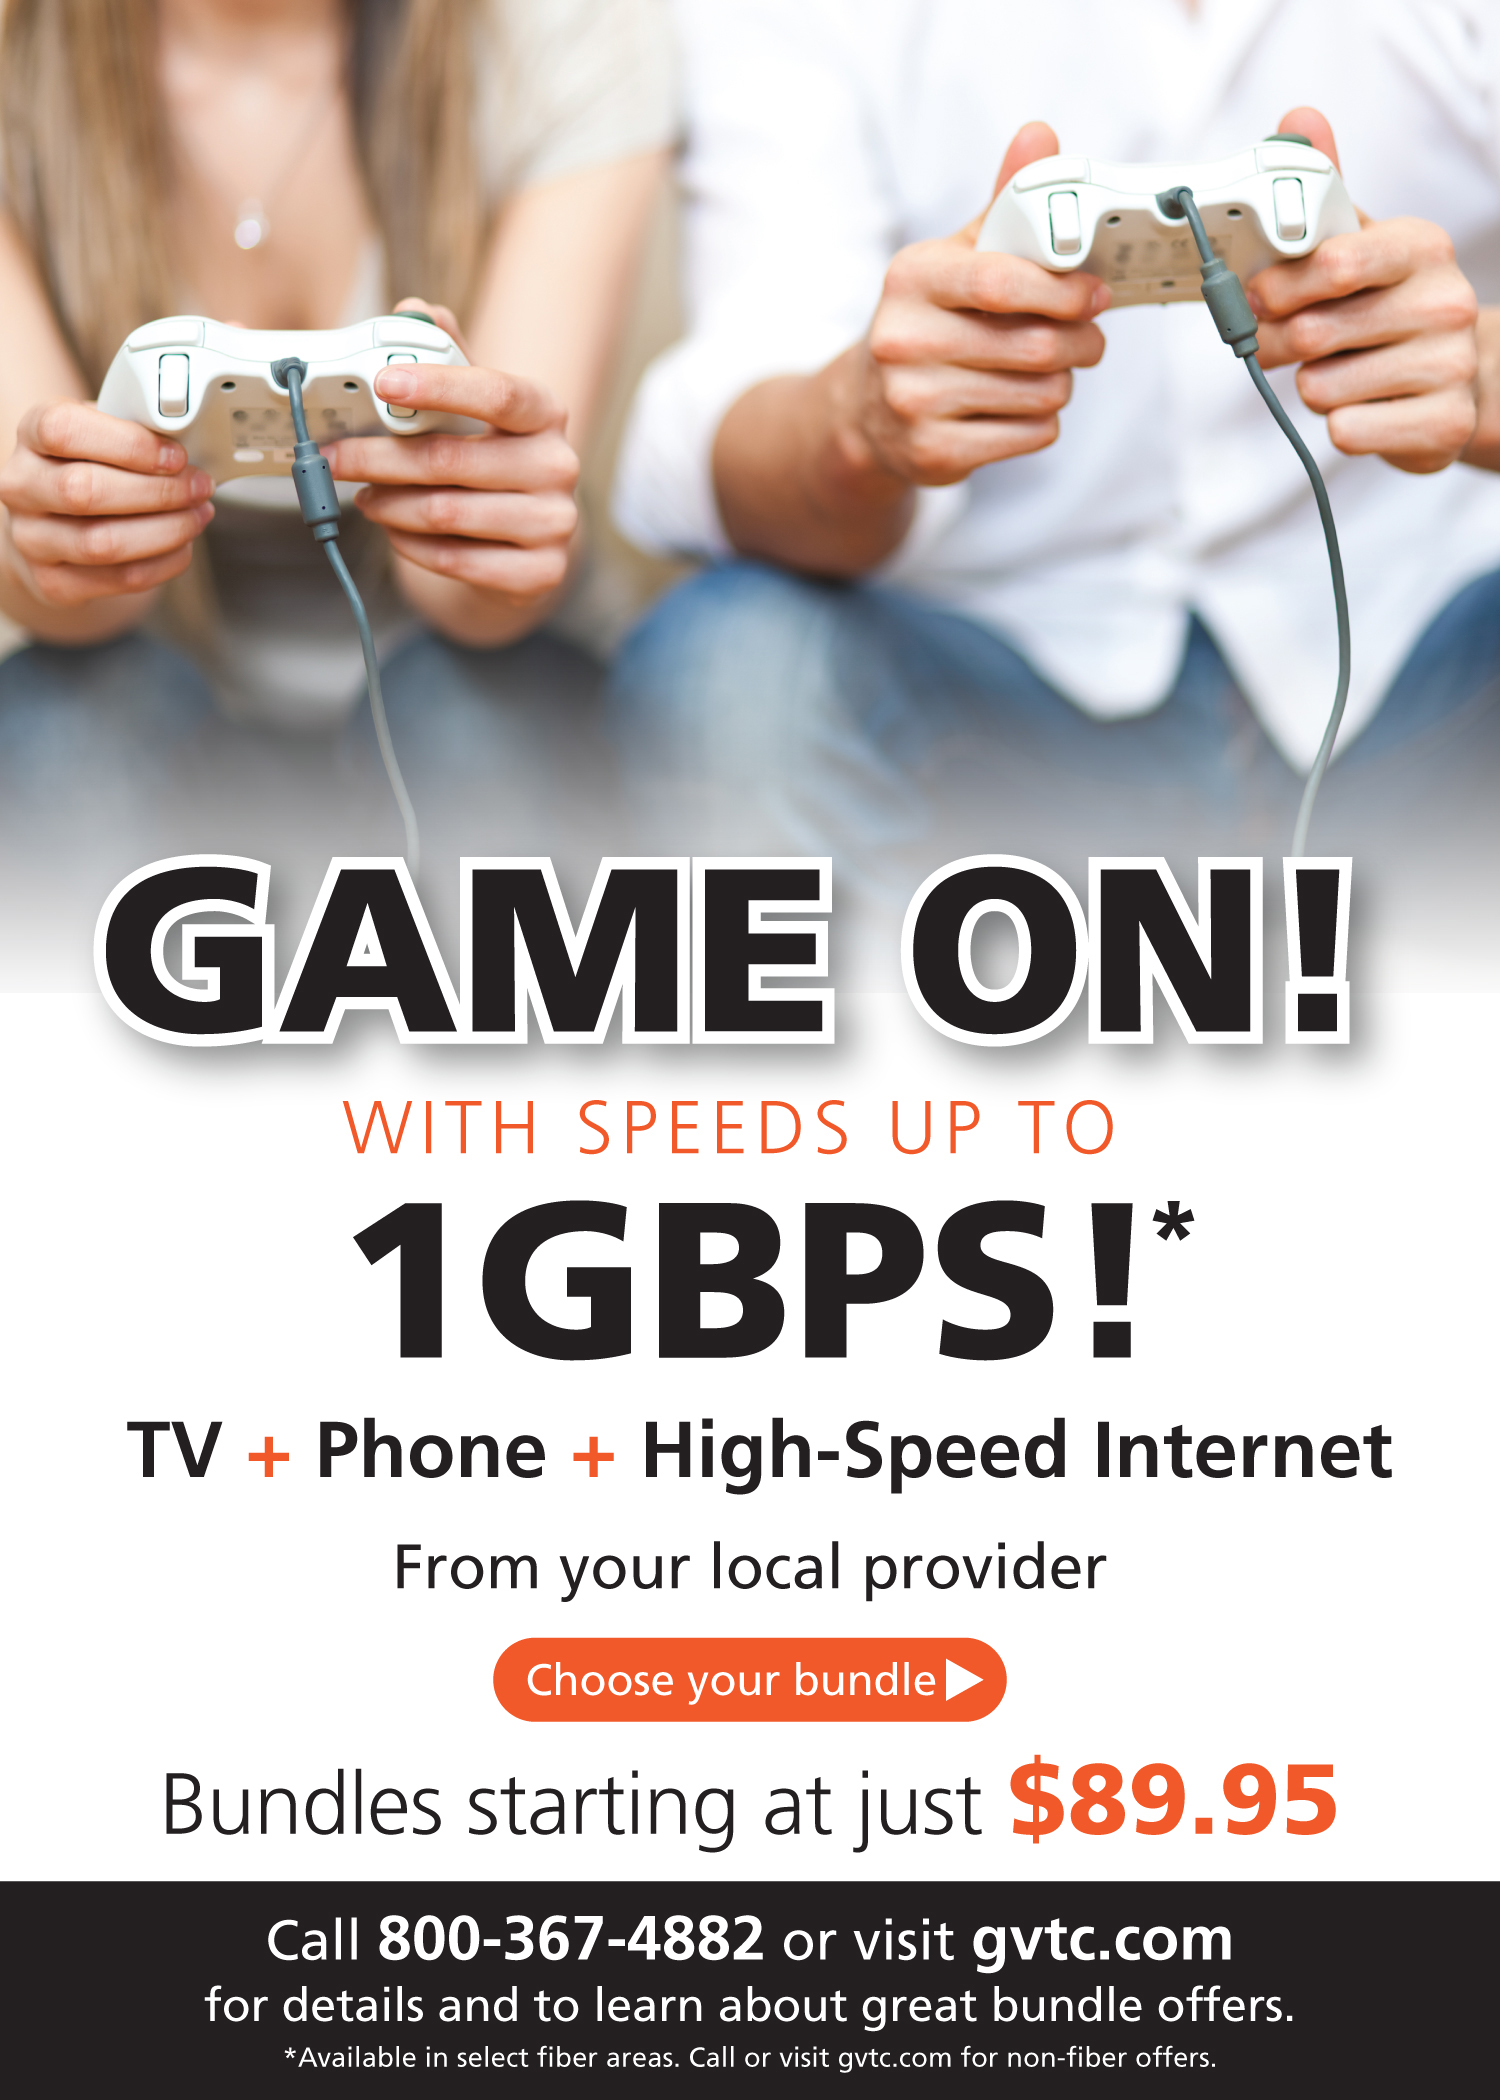 GAME ON with speeds up to 1GBPS! | Bundles starting at just $89.95